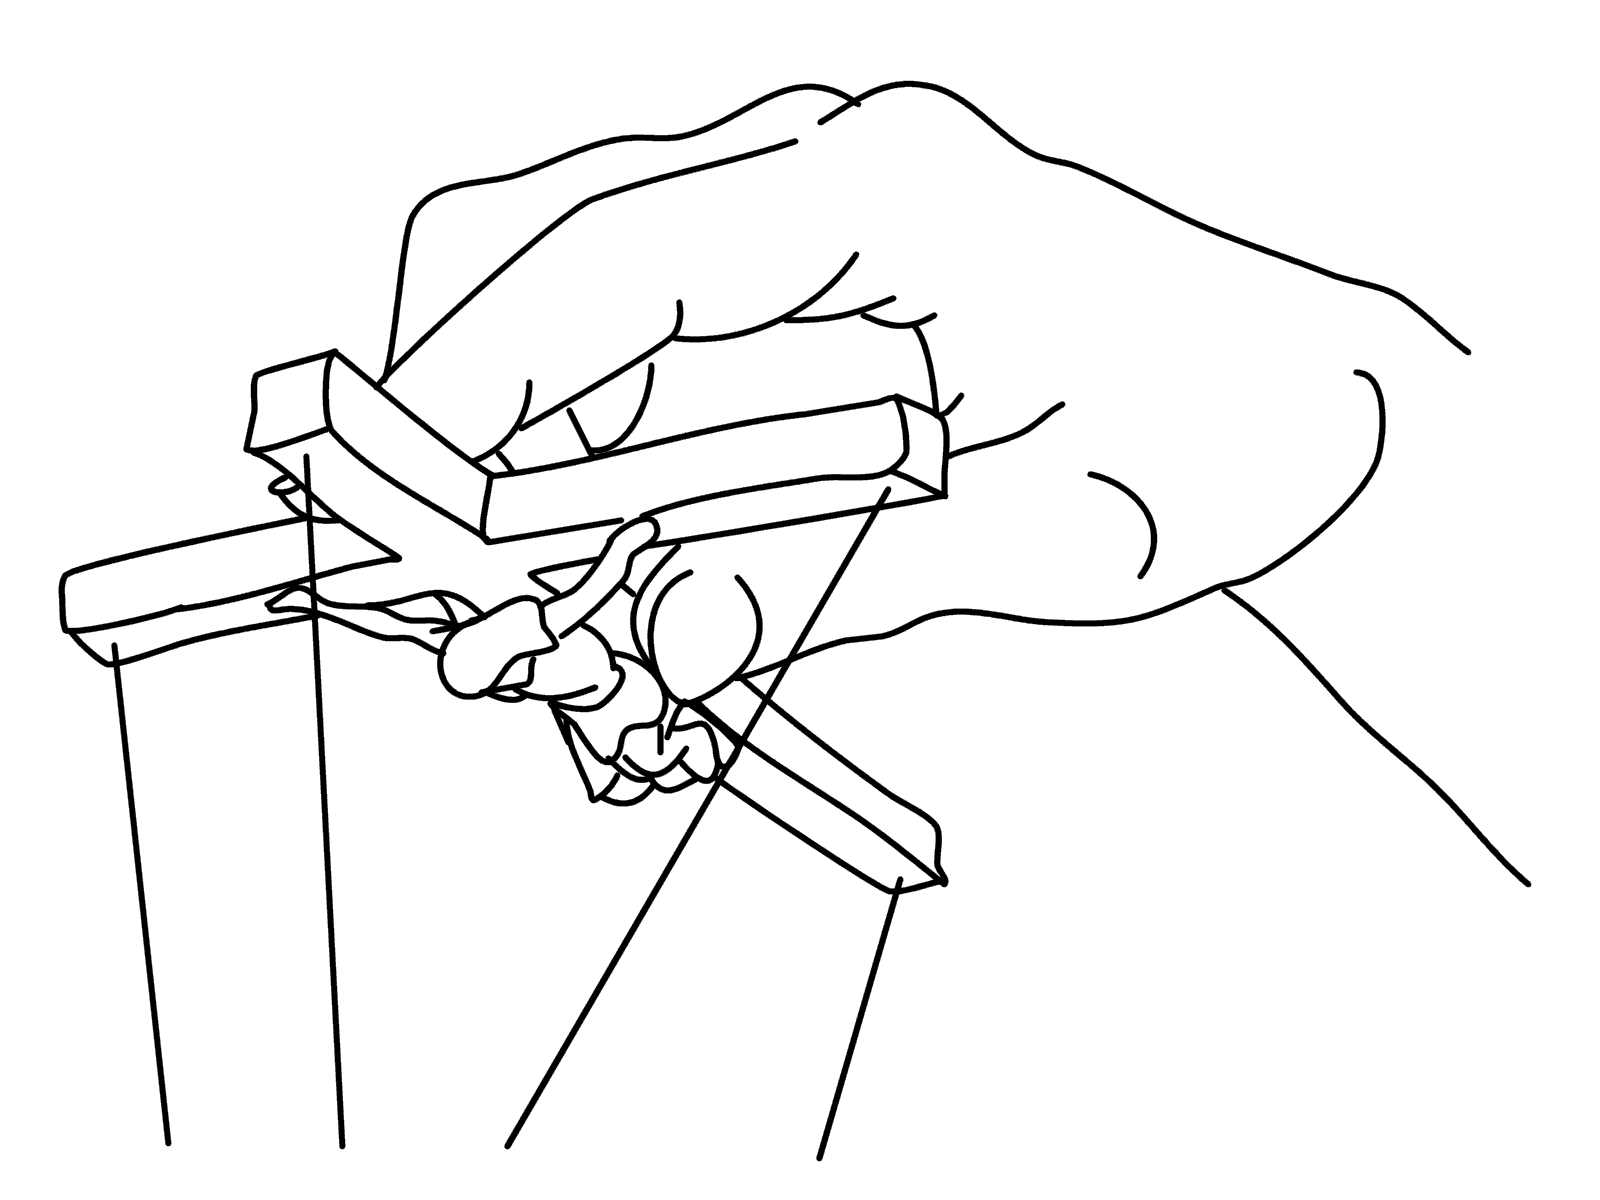 Hands clipart marionette. Puppet show drawing at